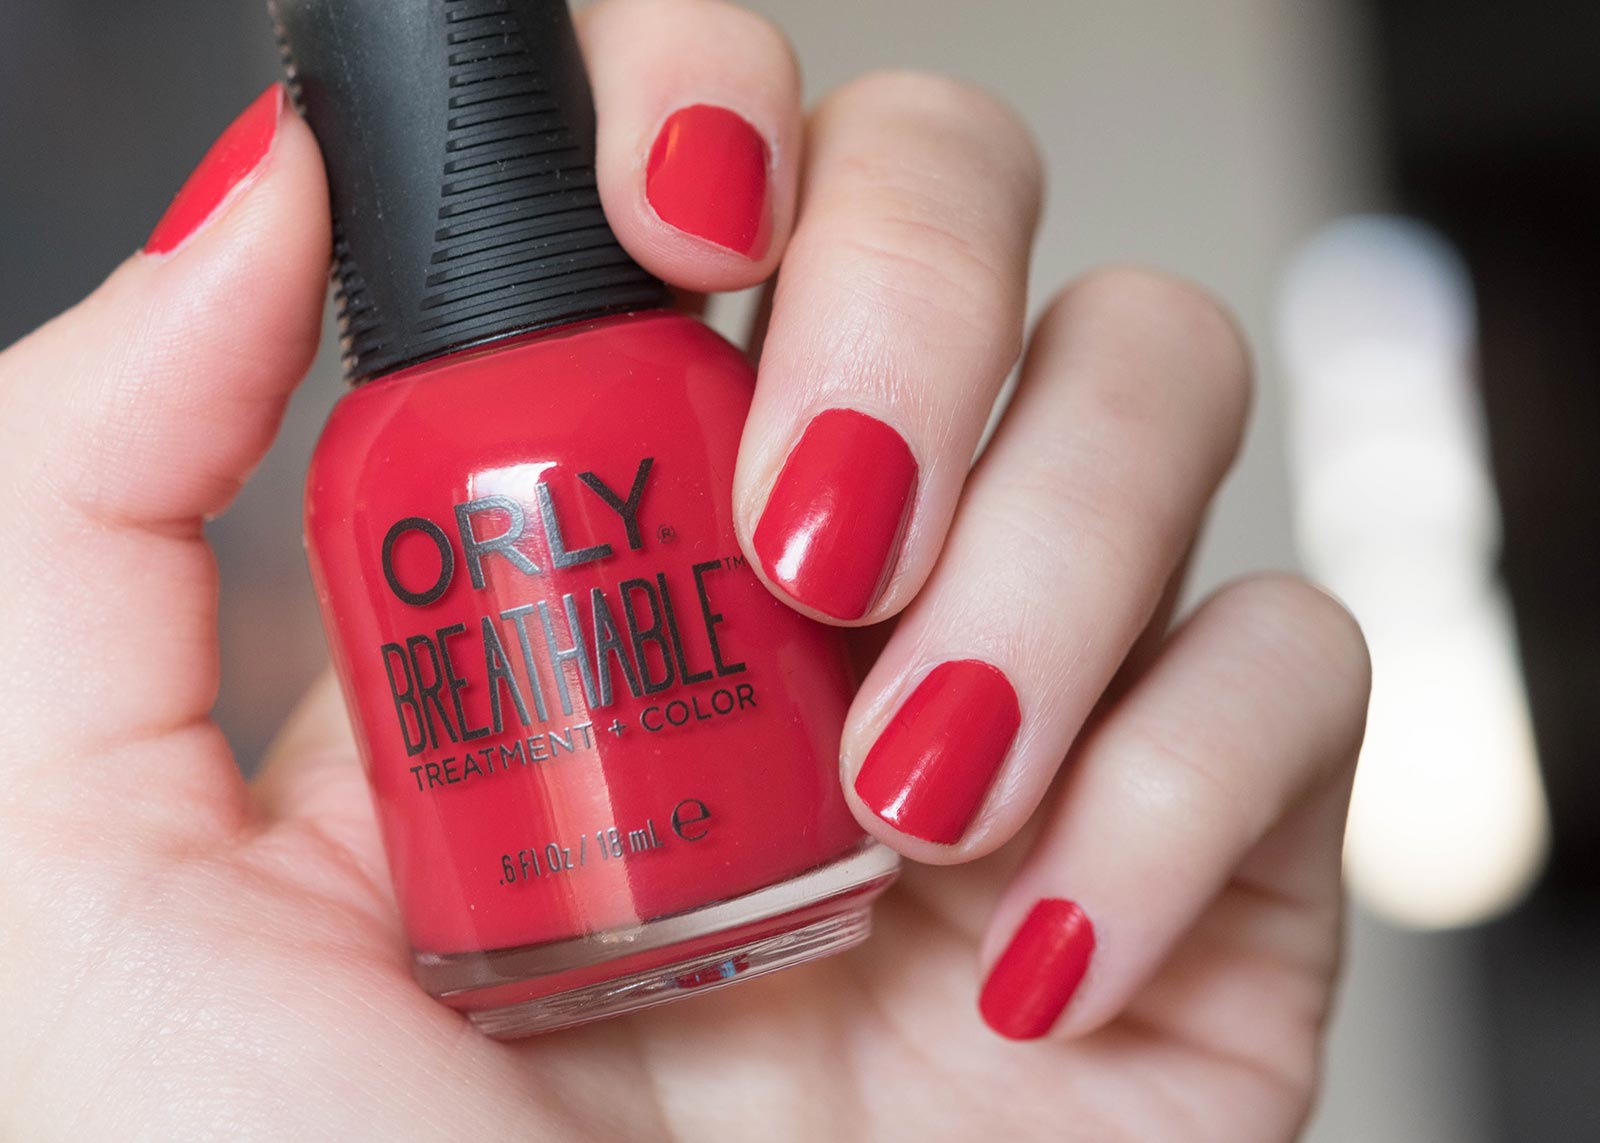 6. Orly Breathable Treatment + Color Nail Polish, Argan Oil Infused Nail Color - wide 5